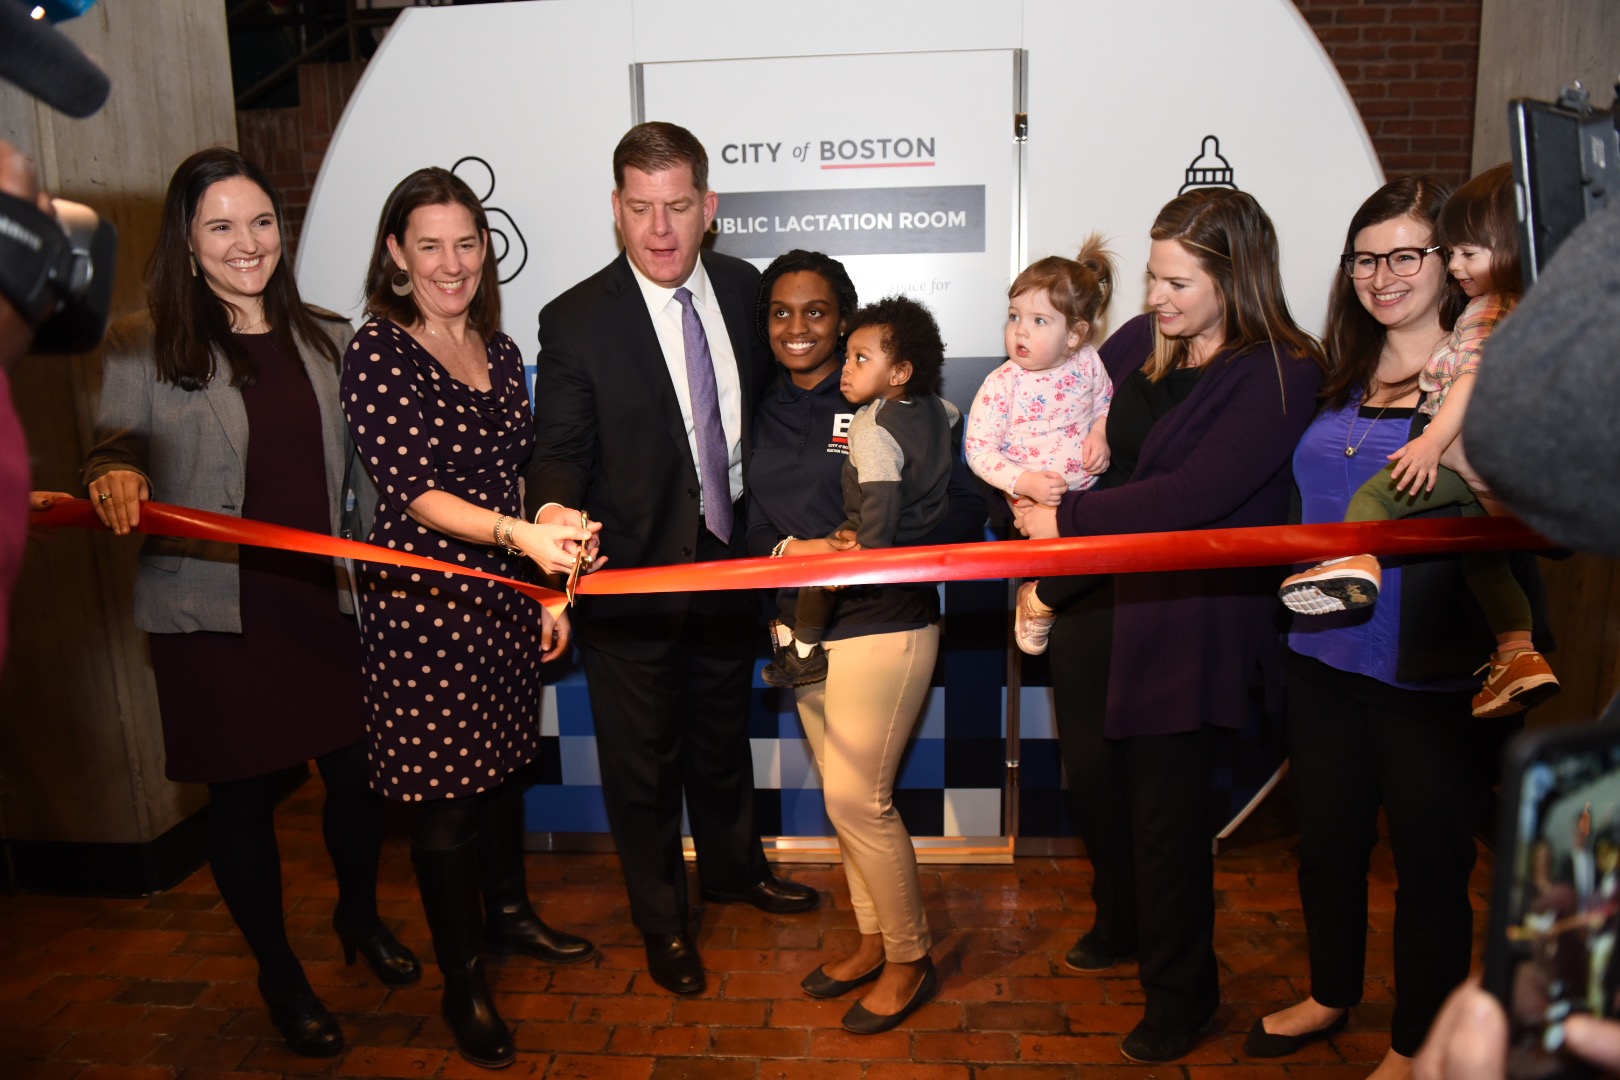 Image for mayor walsh unveiled the lactation room at city hall